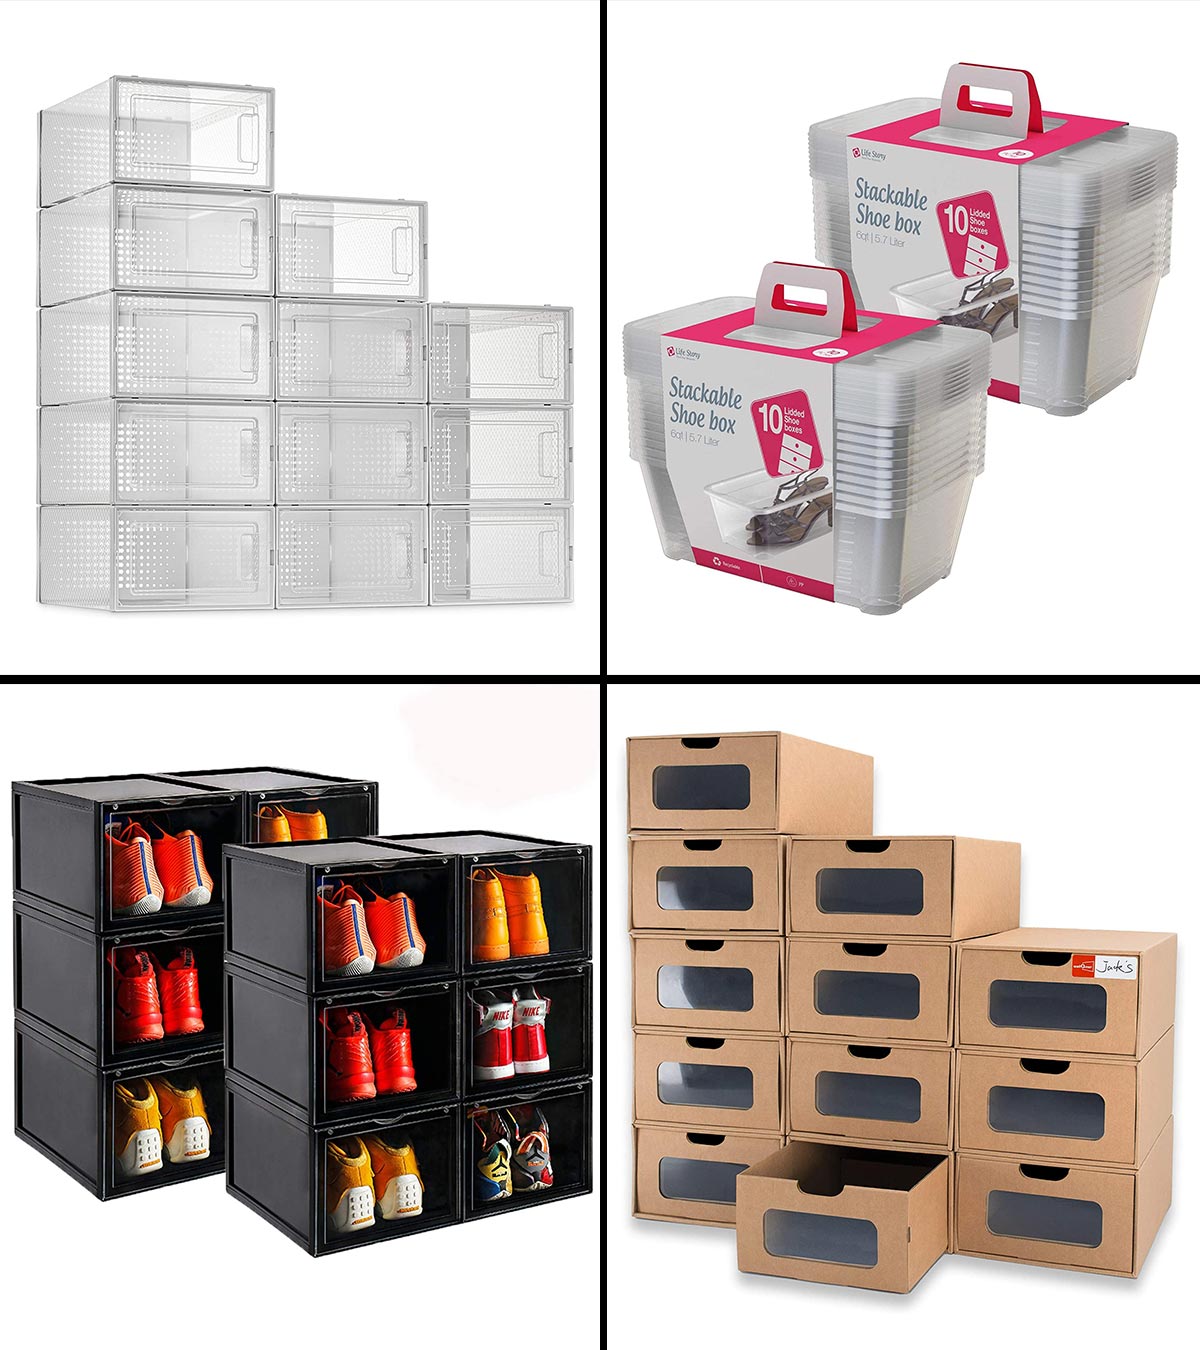 https://www.momjunction.com/wp-content/uploads/2021/07/11-Best-Shoe-Storage-Boxes-In-2021-To-Organize-Your-Shoes-Banner-MJ-Recovered.jpg